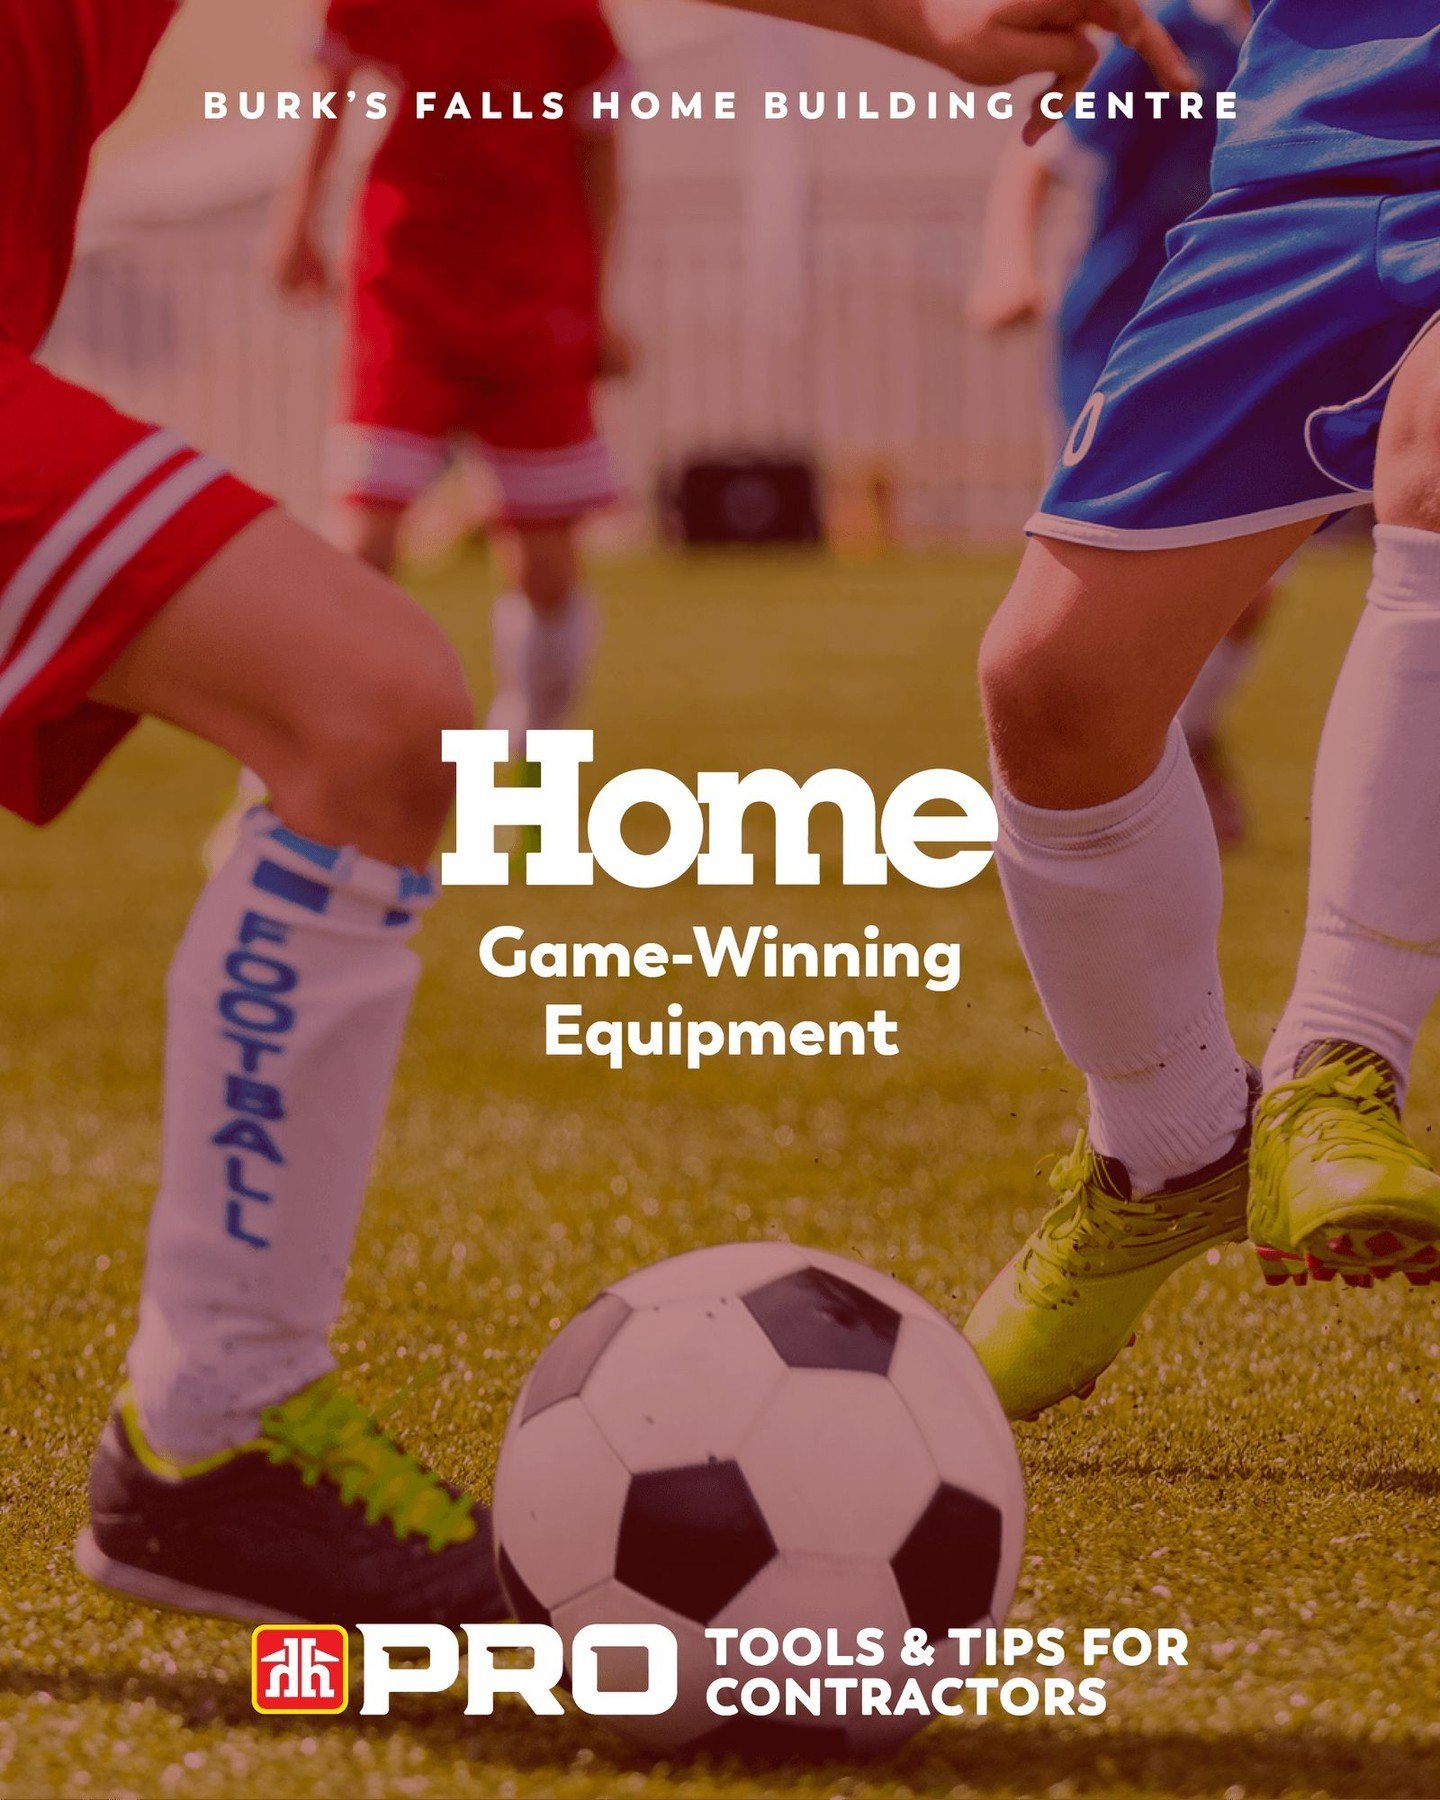 Score big this building season with HOME-Game-Winning equipment from Burk&rsquo;s Falls Home Building Centre! 

Visit the Home Hardware PRO website page to find reviews on all the latest and greatest PRO tools, informative videos on installing the la